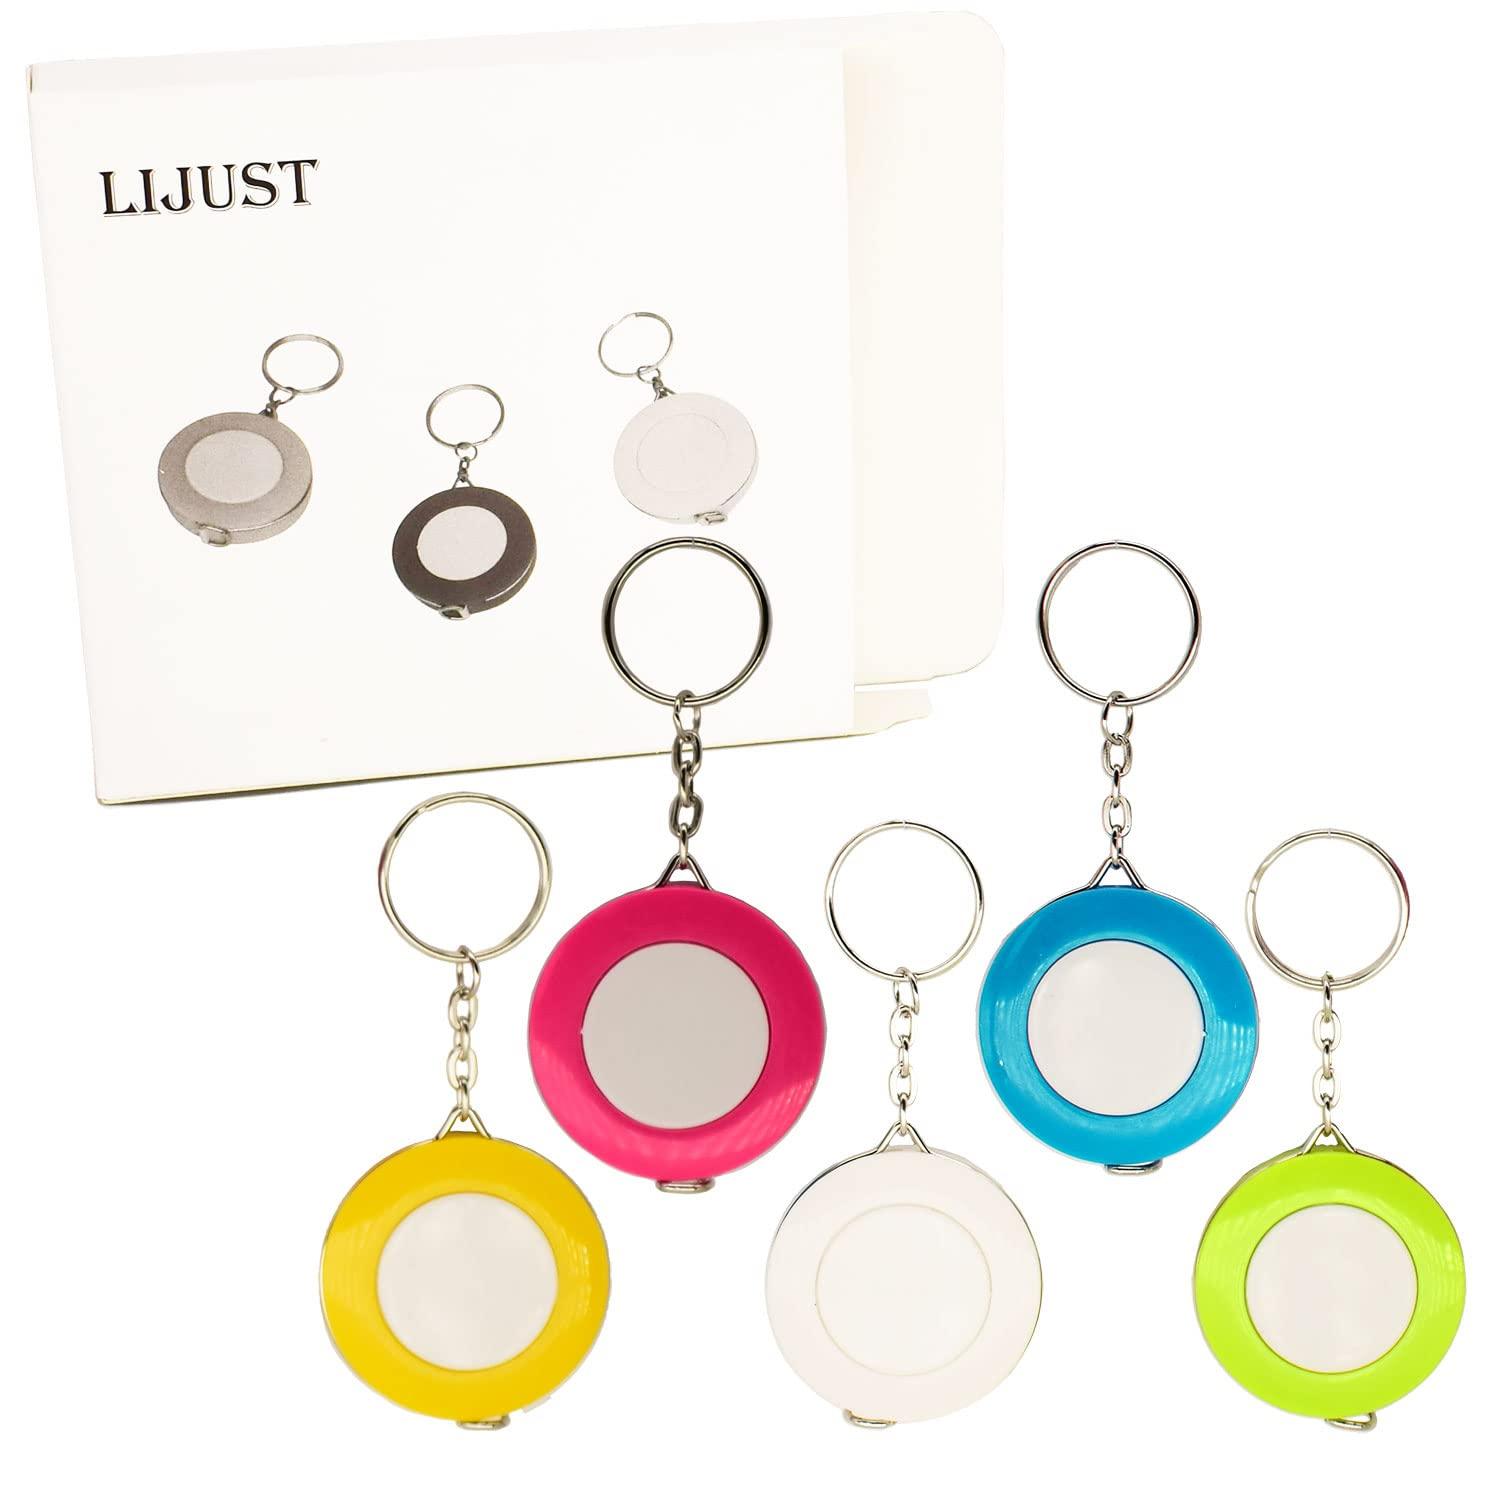 LIJUST 150 cm/60 inch Retractable Measuring Tape for Body Double Sided Soft  Tape Measure for Body Sewing Fabric Tailor Cloth Craft Measurement Tape 5  Pack(blue, white, green, deep pink, yellow)